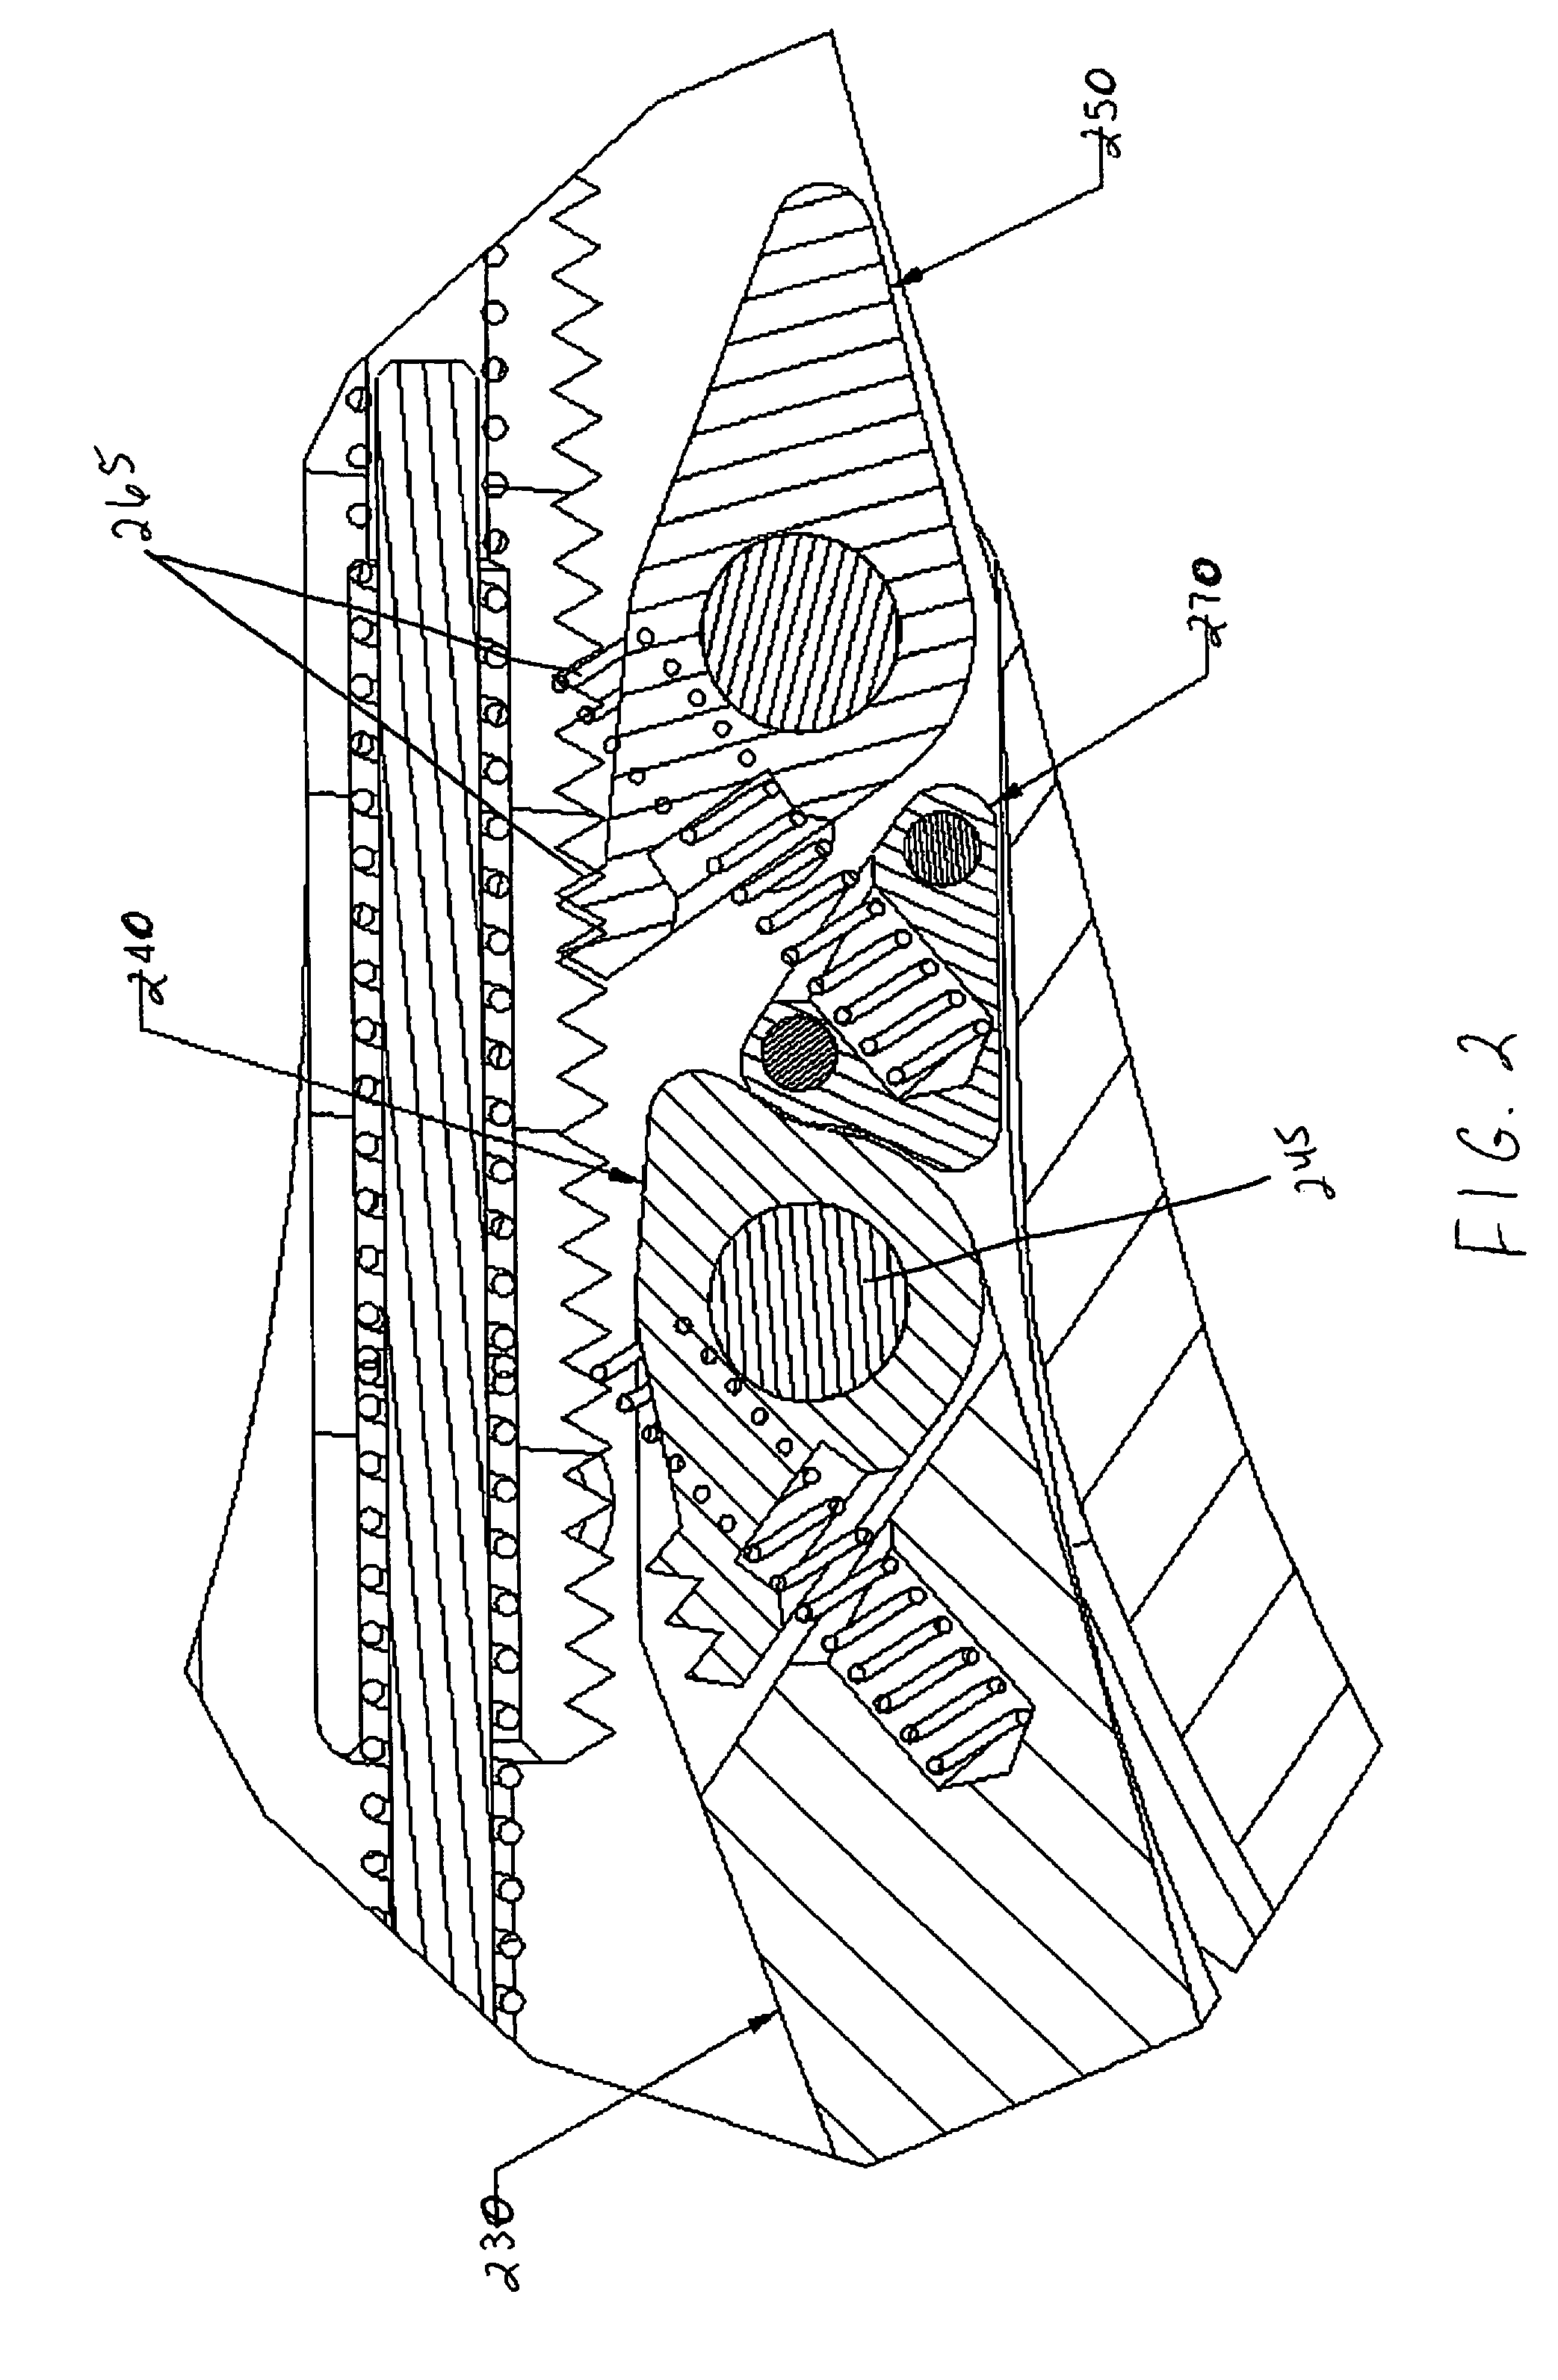 Rod reducing instrument and methods of use thereof